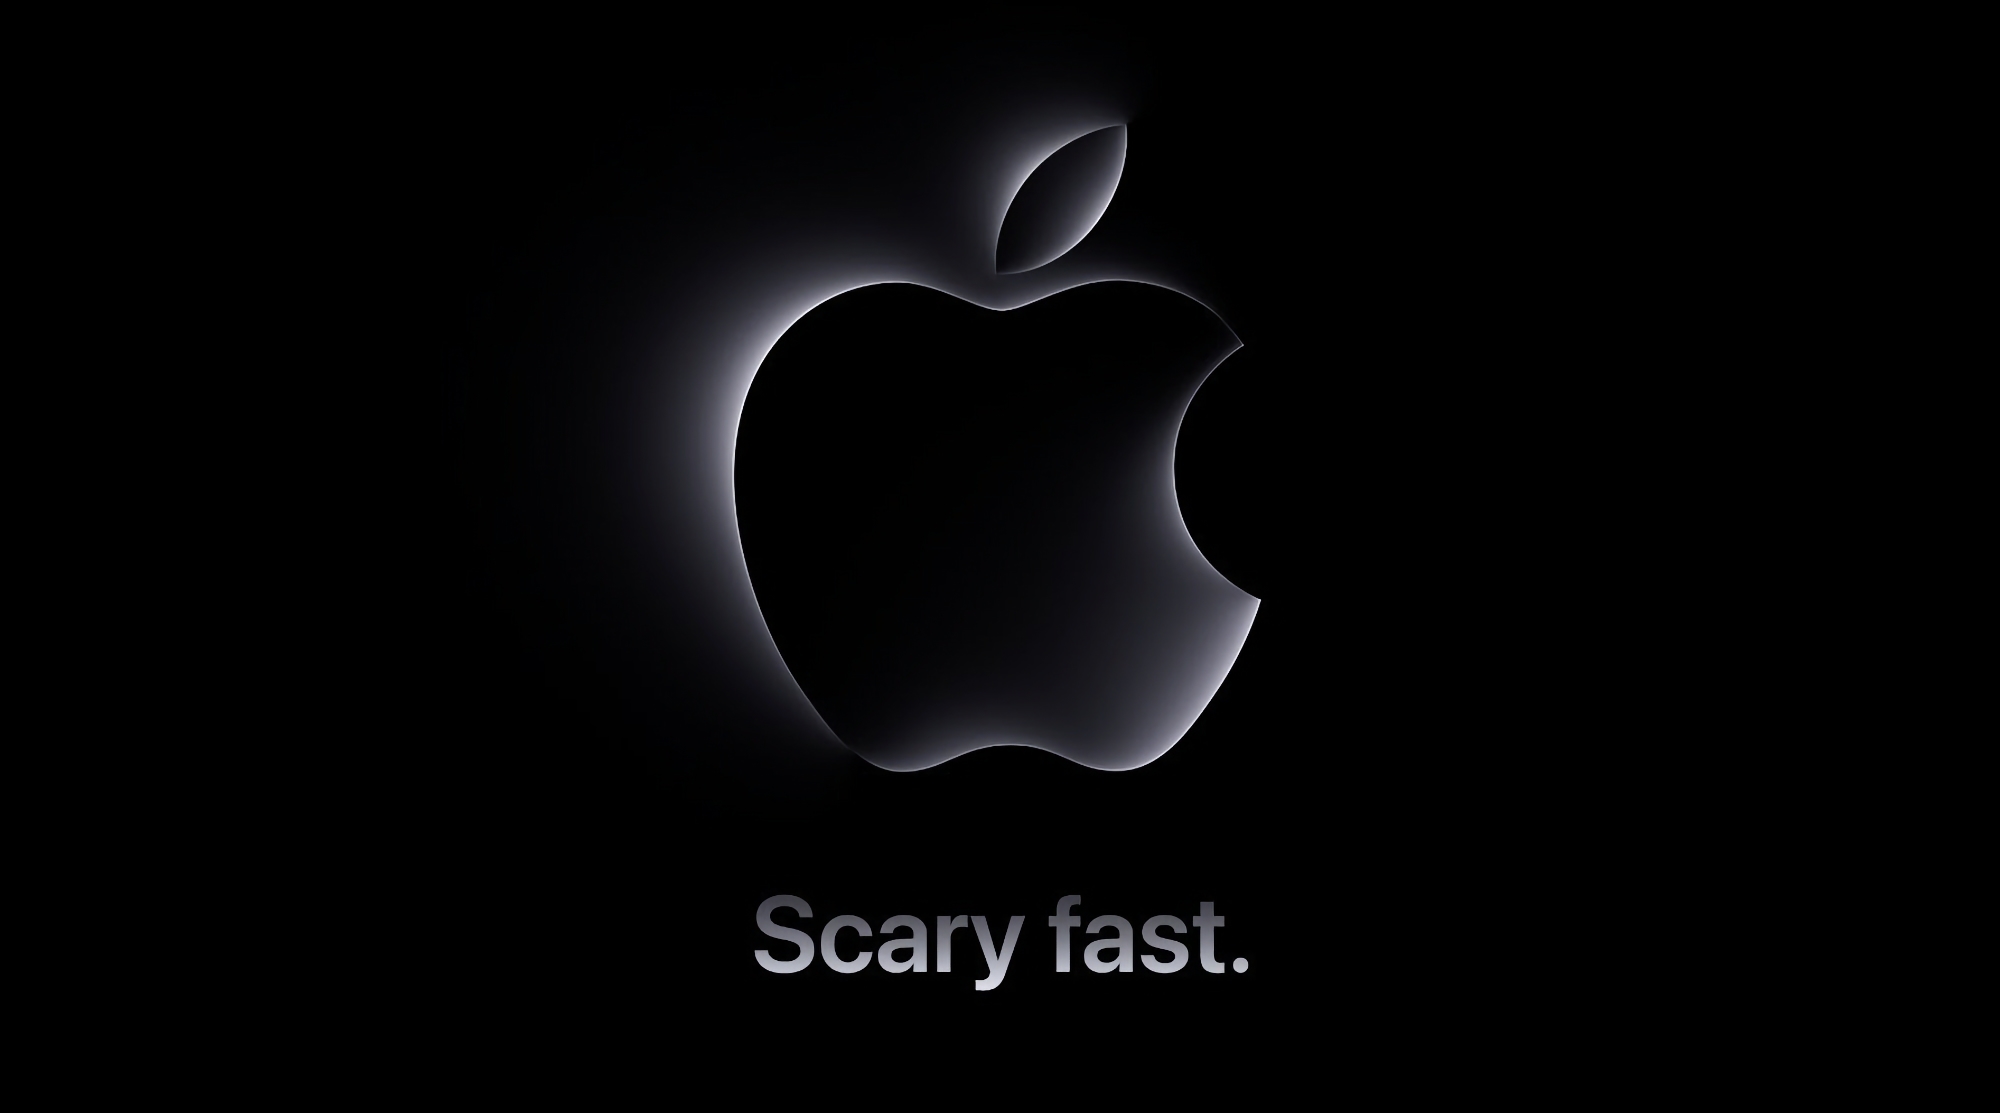 Apple announced Scary Fast presentation, waiting for the release of new Macs with M3 chip